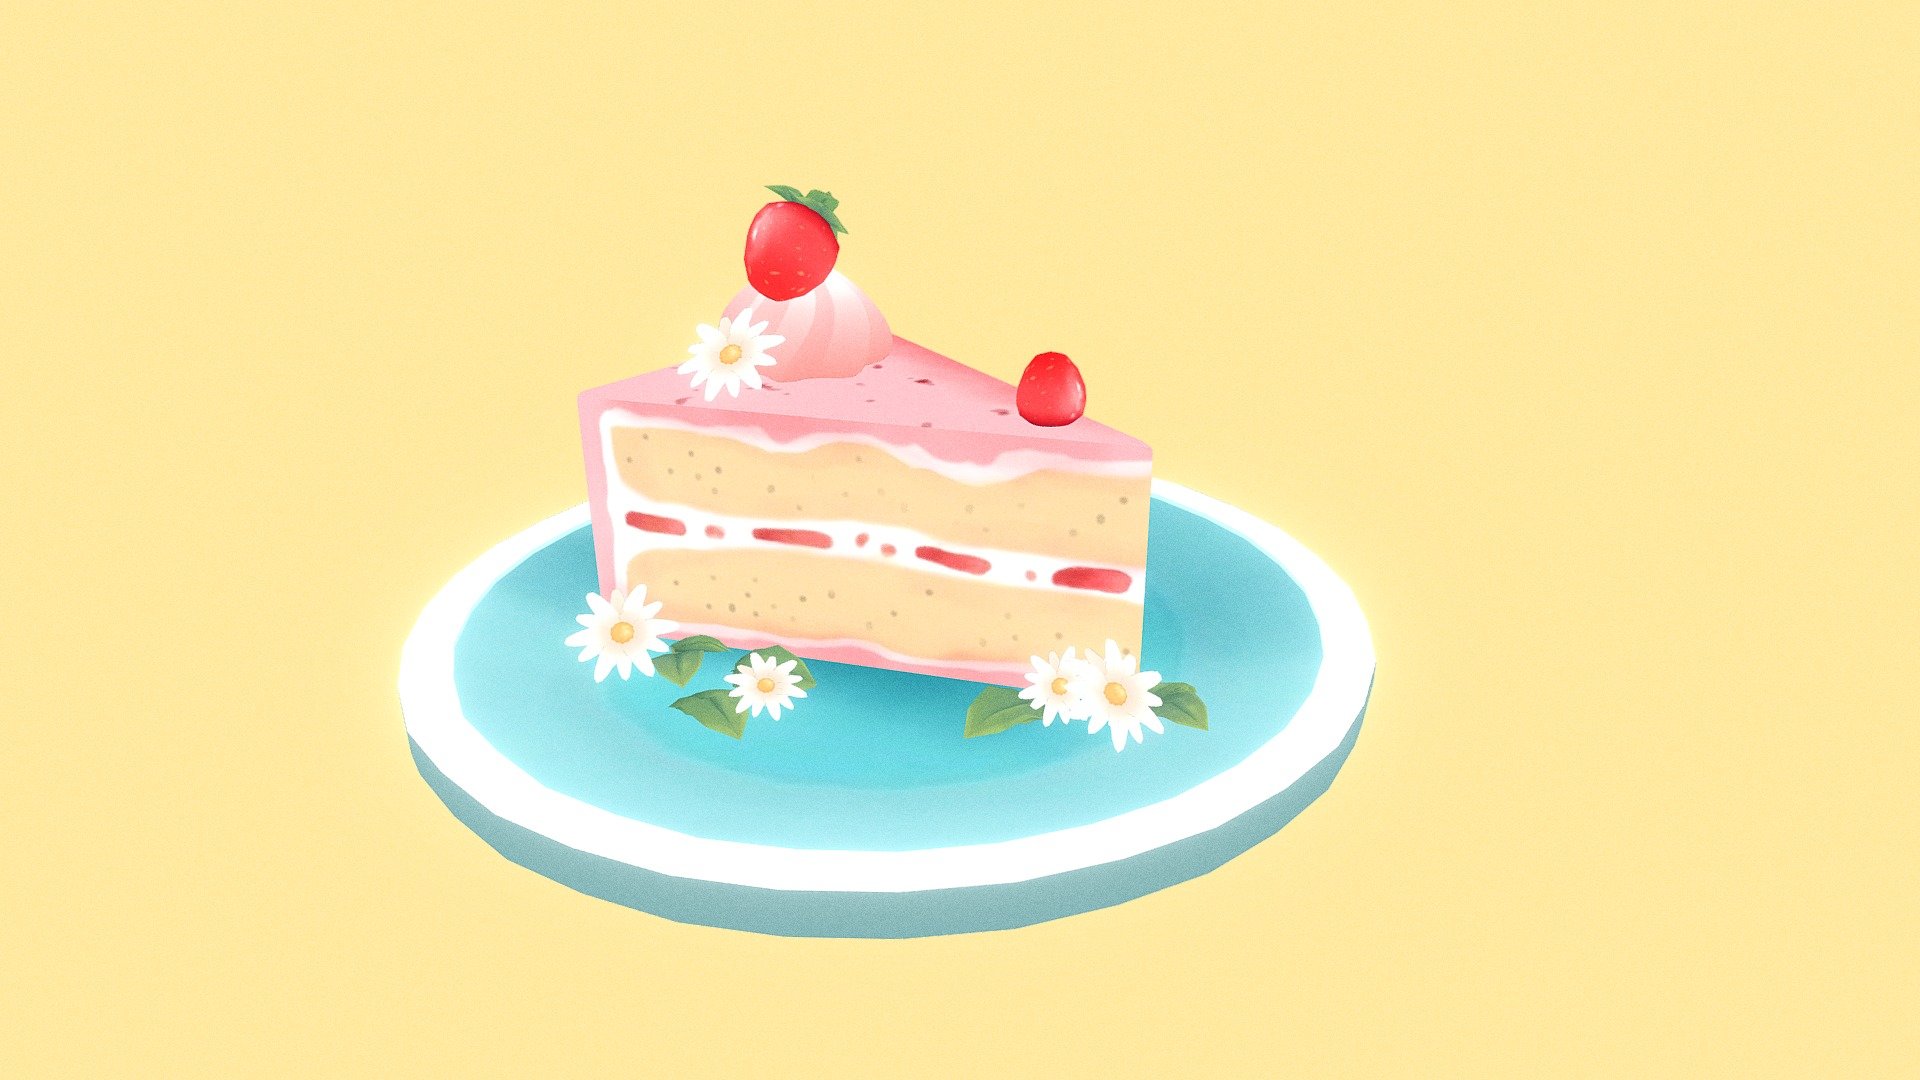 This is a cute slice of low poly cake with a handpainted texture I made a few months ago. I enjoyed working on this little side project and using bright, happy colours :)

Fully created in Blender - Strawberry Cake - Buy Royalty Free 3D model by AngLoop (@Tinnuu) 3d model